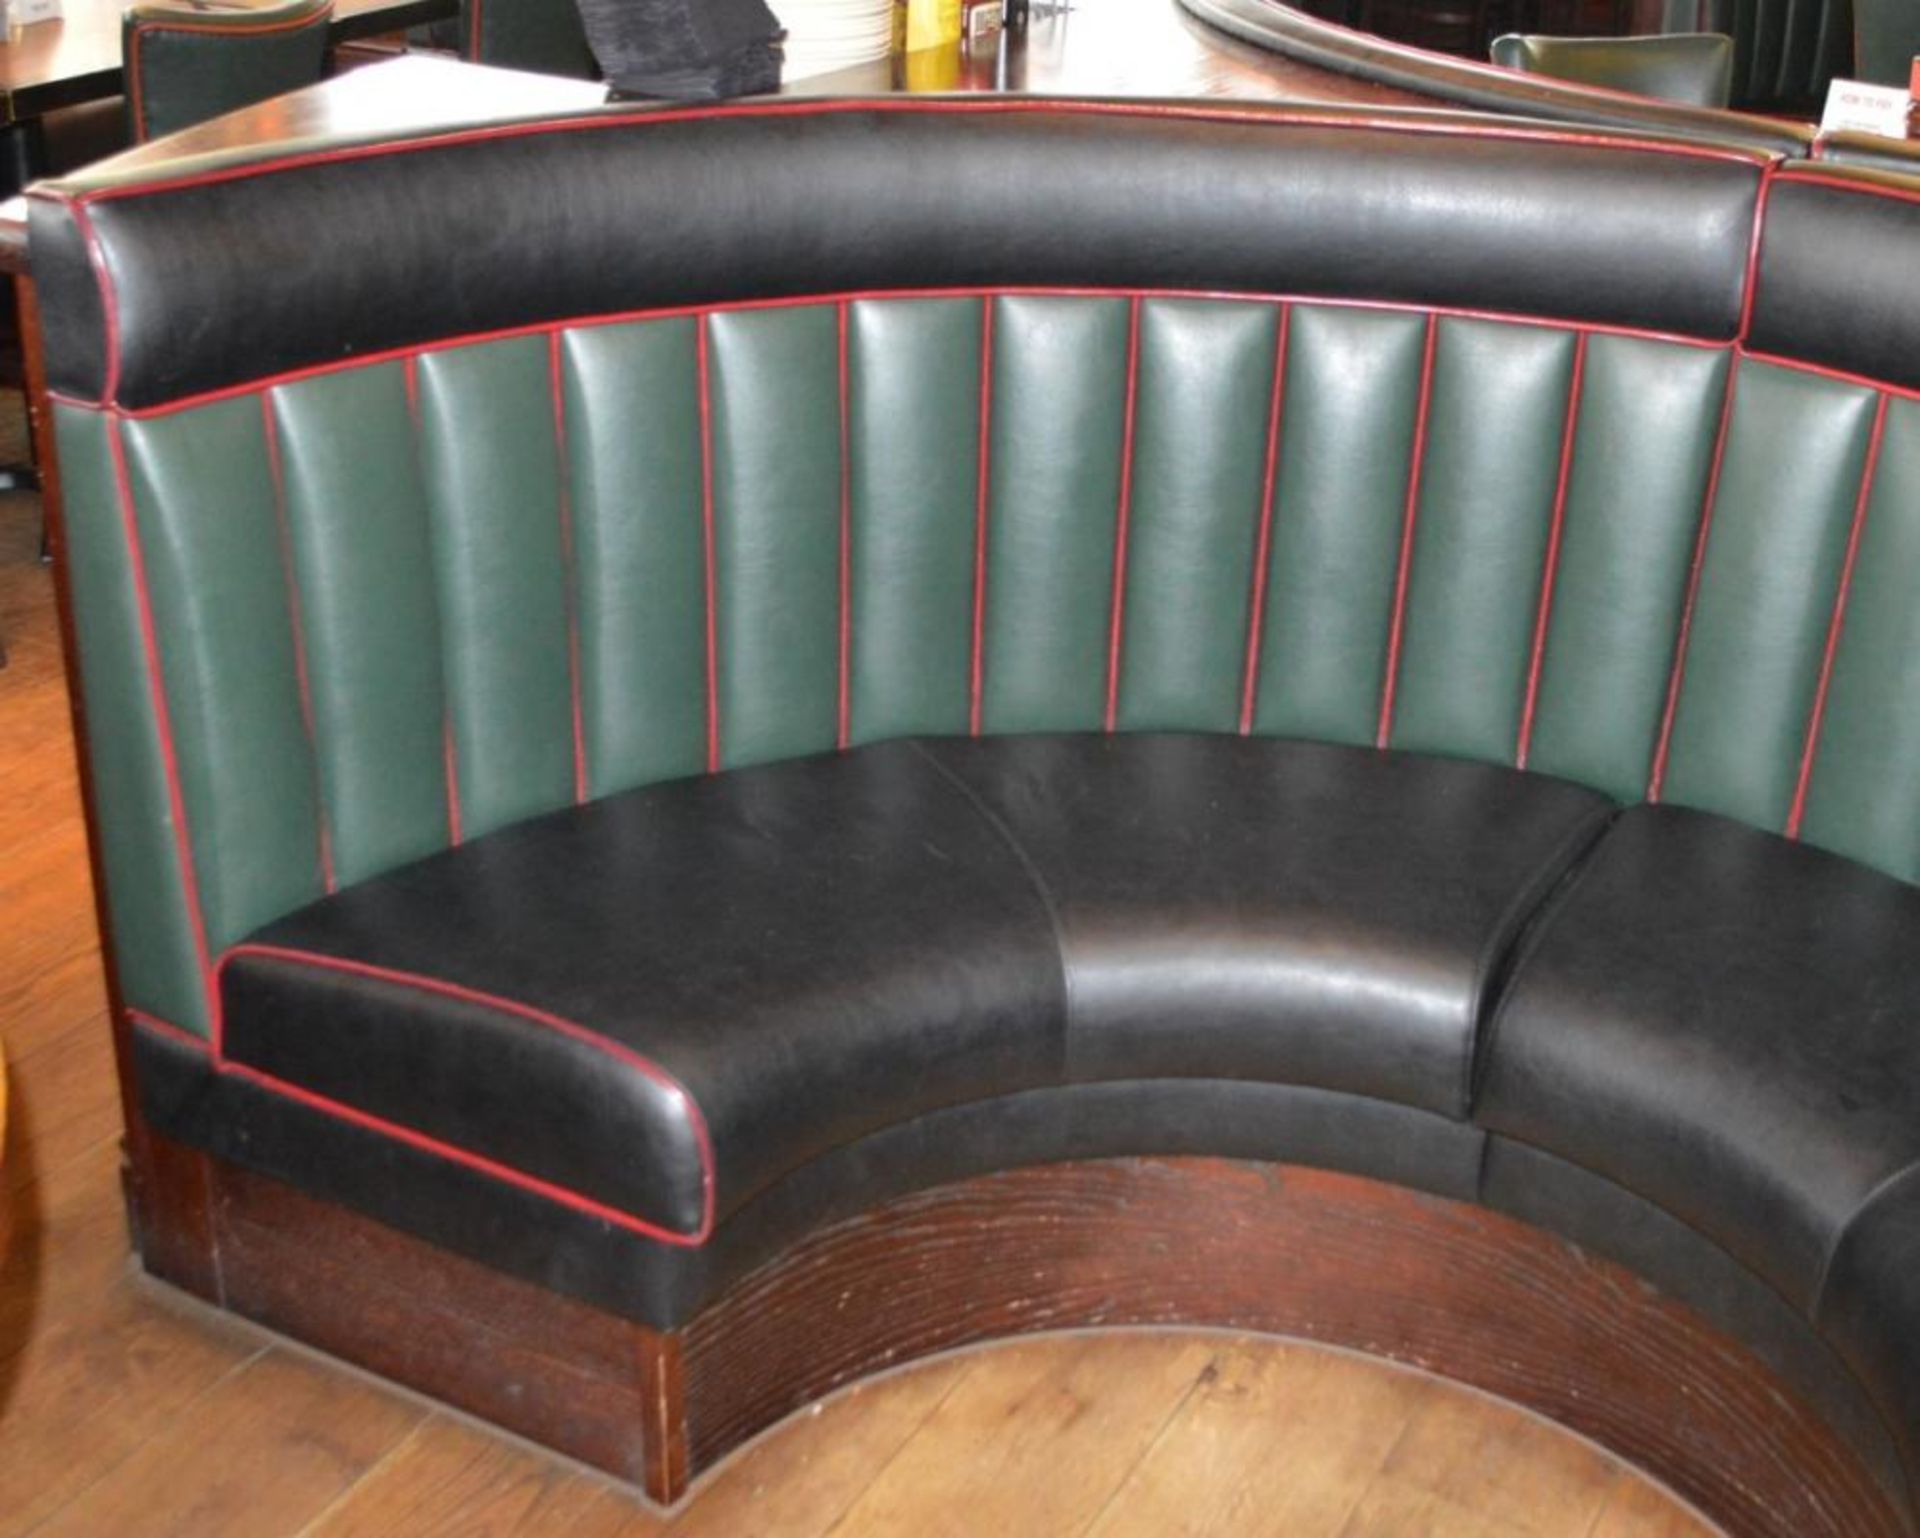 1 x Contemporary Half Circle Seating Booth - Features a Leather Upholstery in Green and Black, - Image 4 of 5